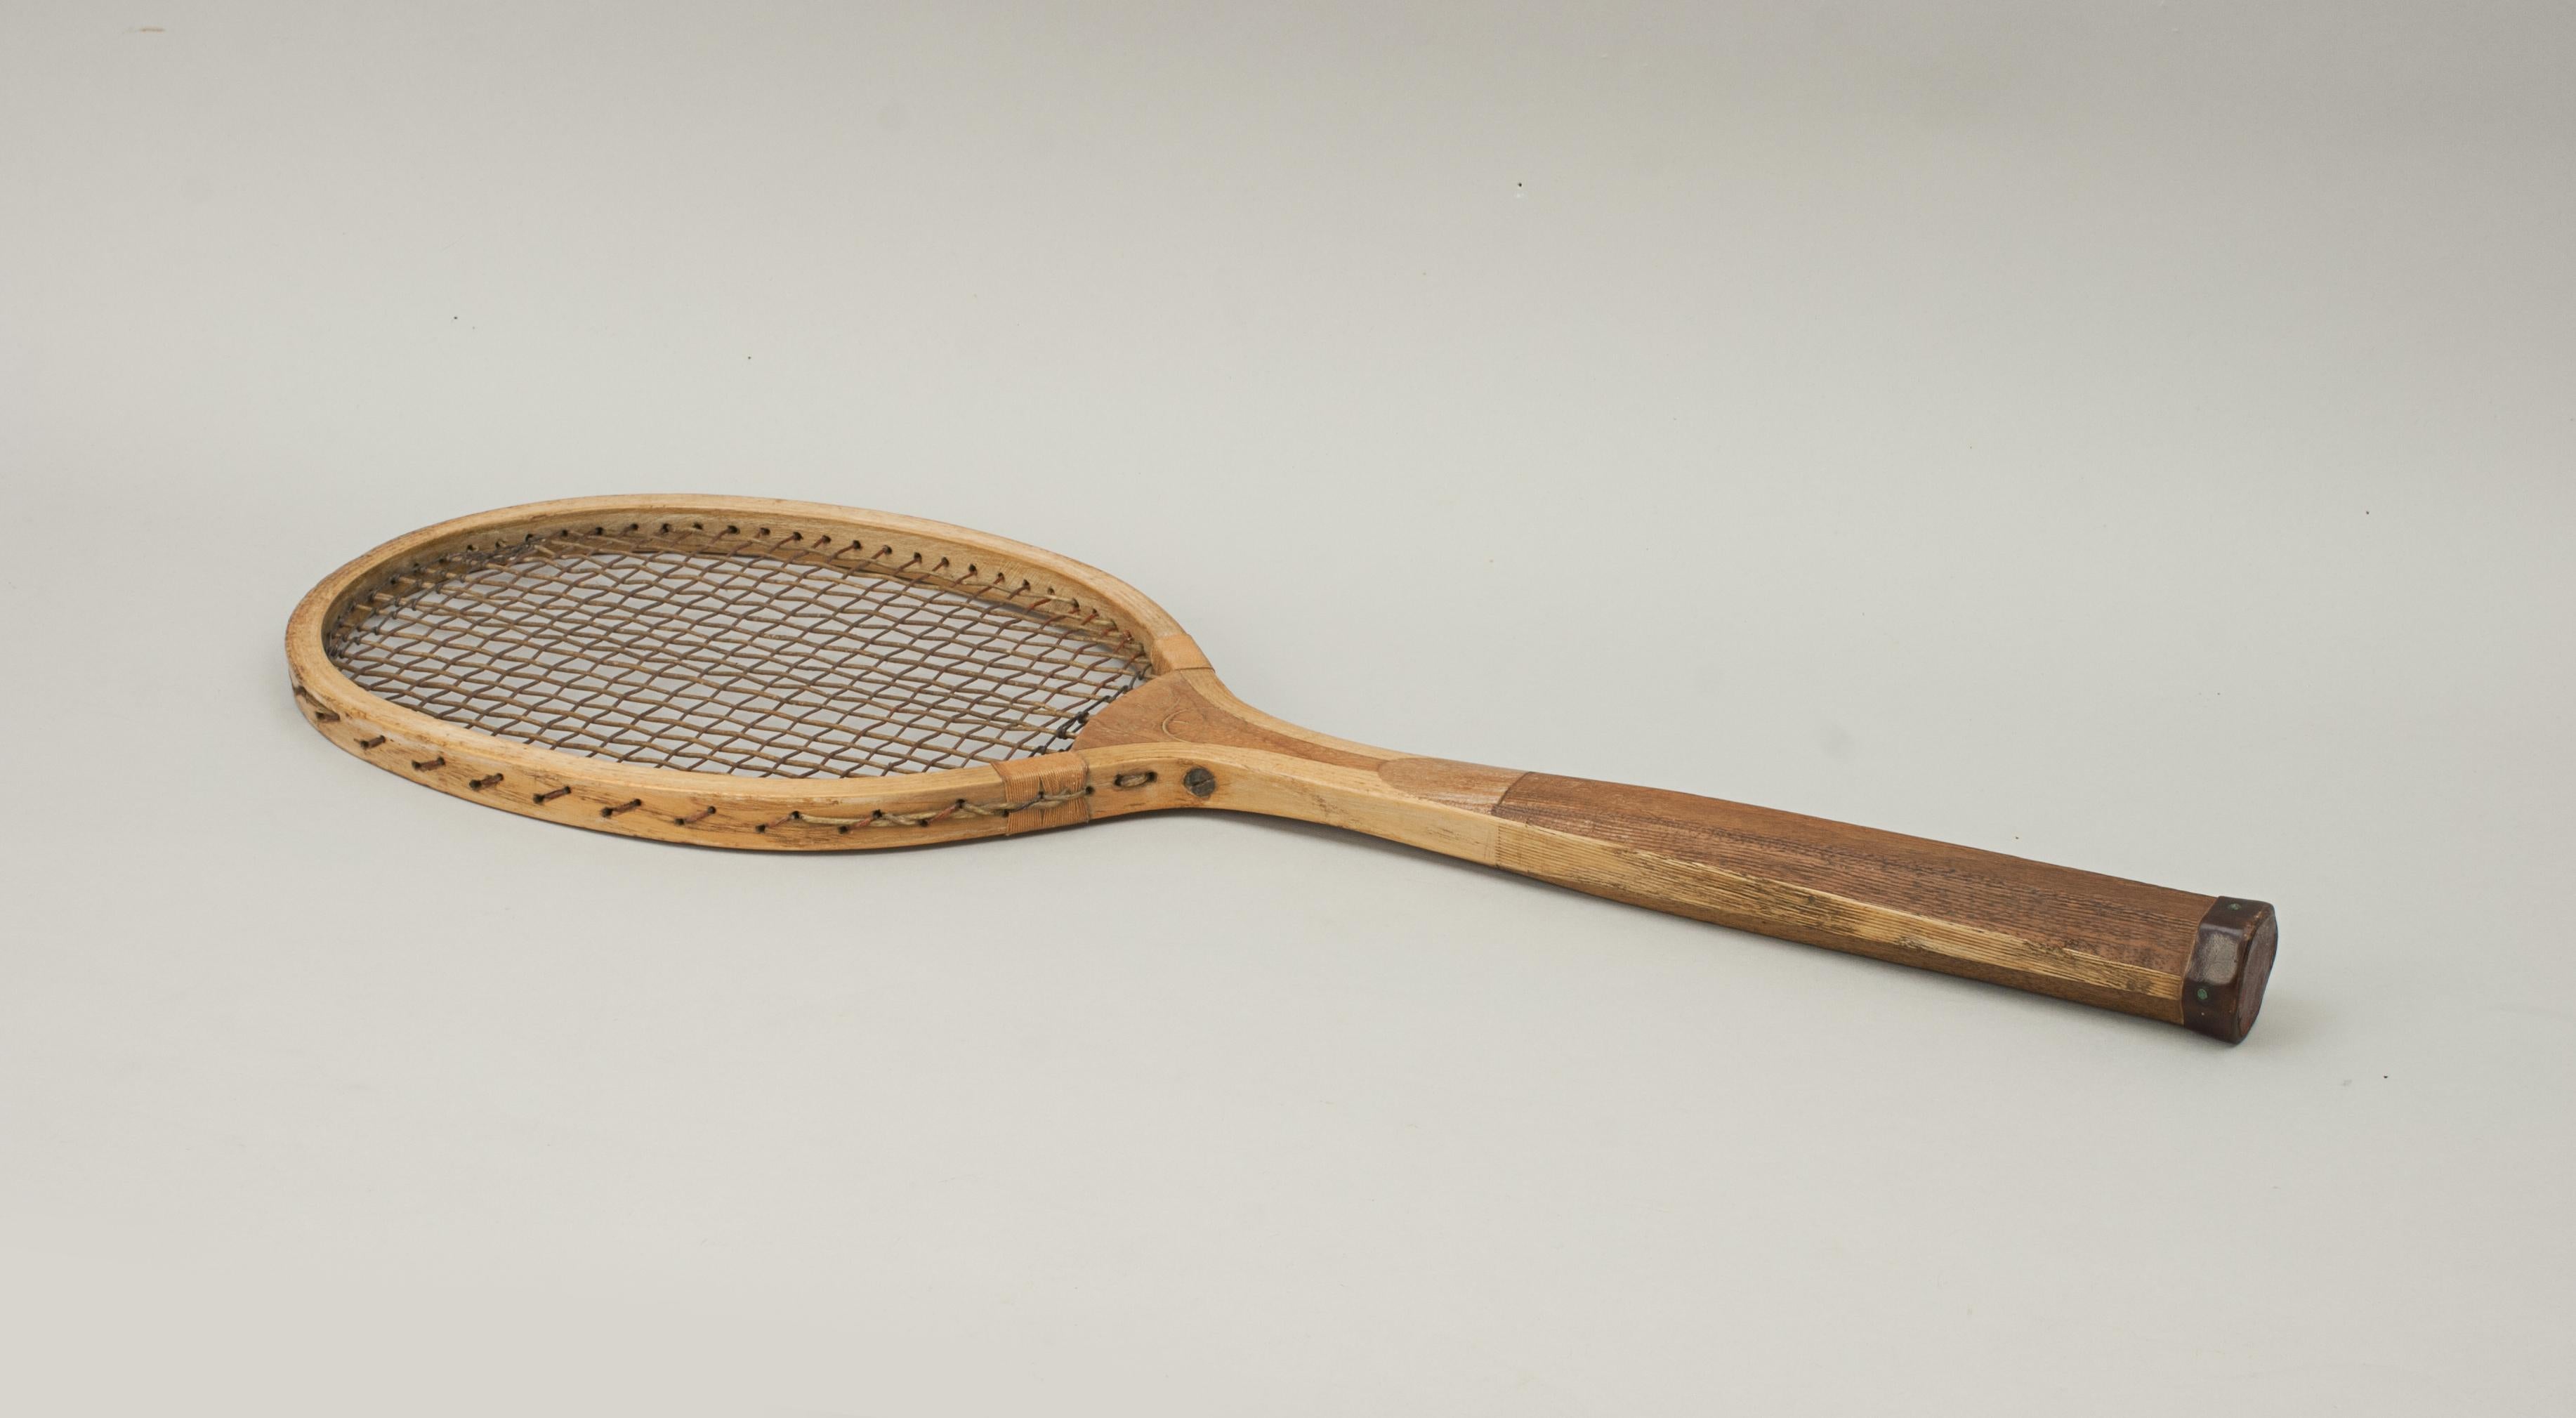 Vintage wooden Lawn Tennis racket, The Service.
A fine Lawn Tennis racket in excellent original condition. The convex walnut wedge stamped 